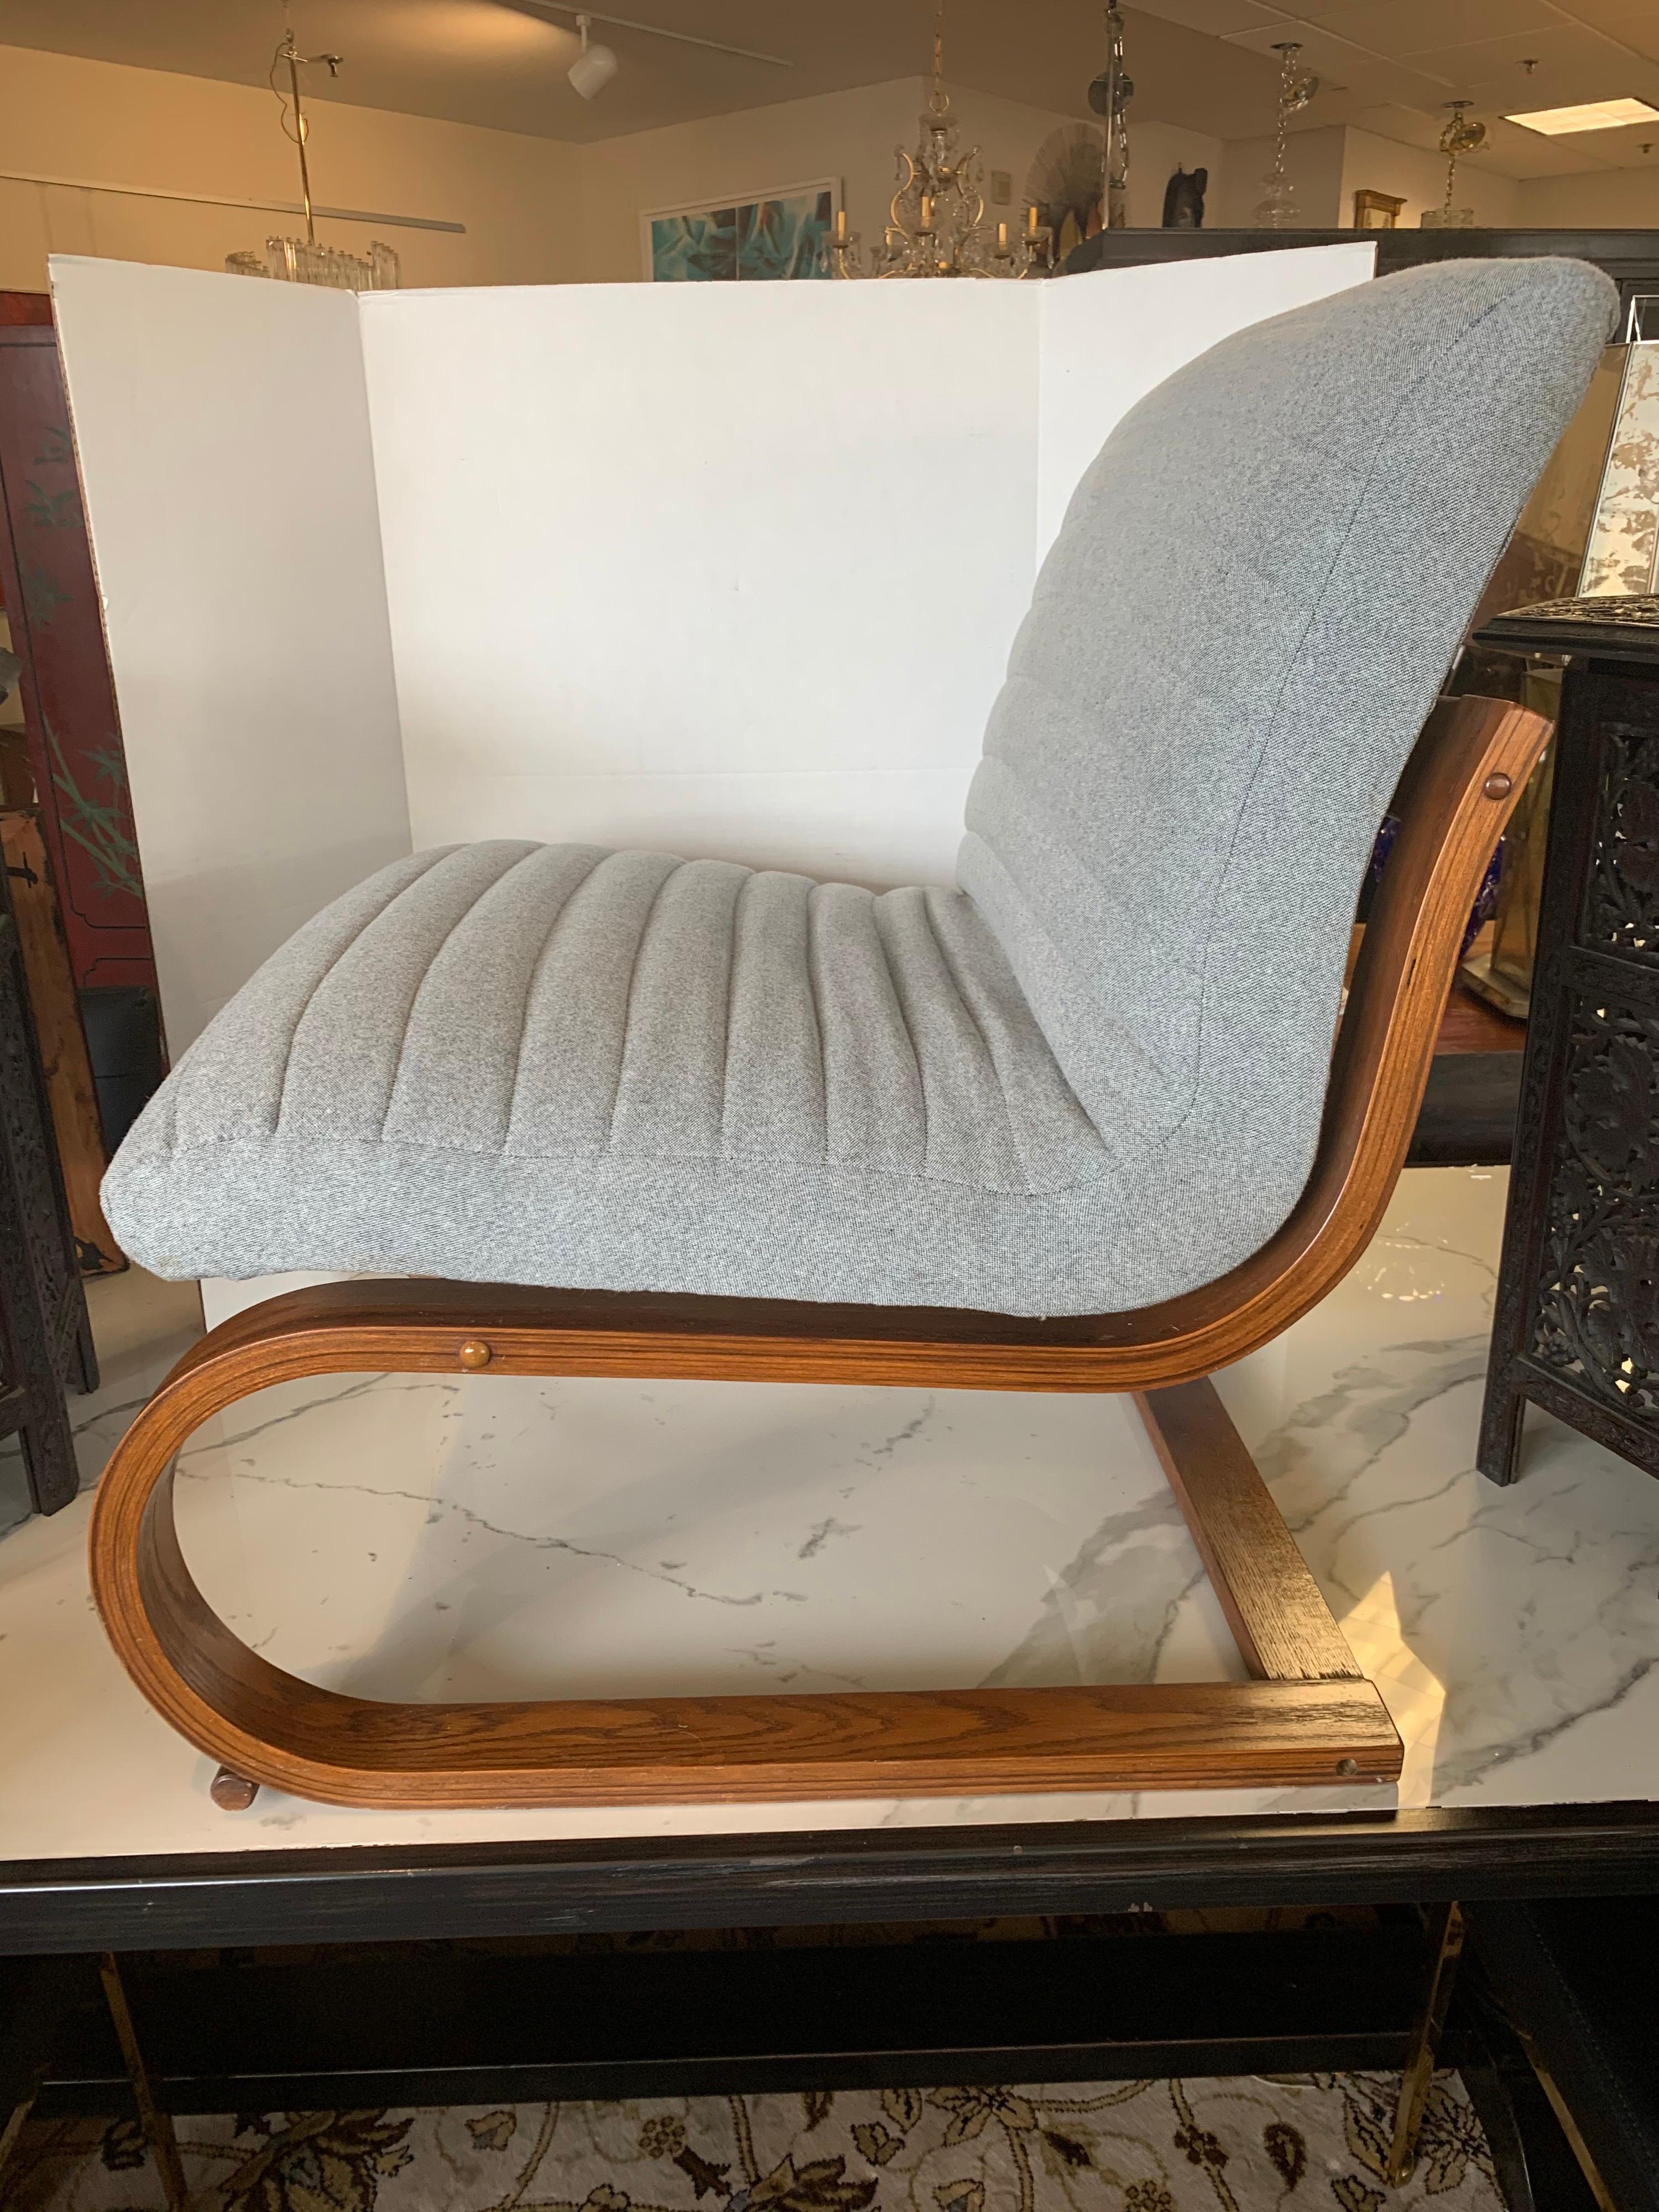 Stunning, newly upholstered in gray Herman Miller fabric, bentwood lounge chair by Charlton, USA,
circa 1970s with iconic lines and scale and the oh so coveted bentwood curves.
Seat height is 16 inches and all other dimensions are below. Features